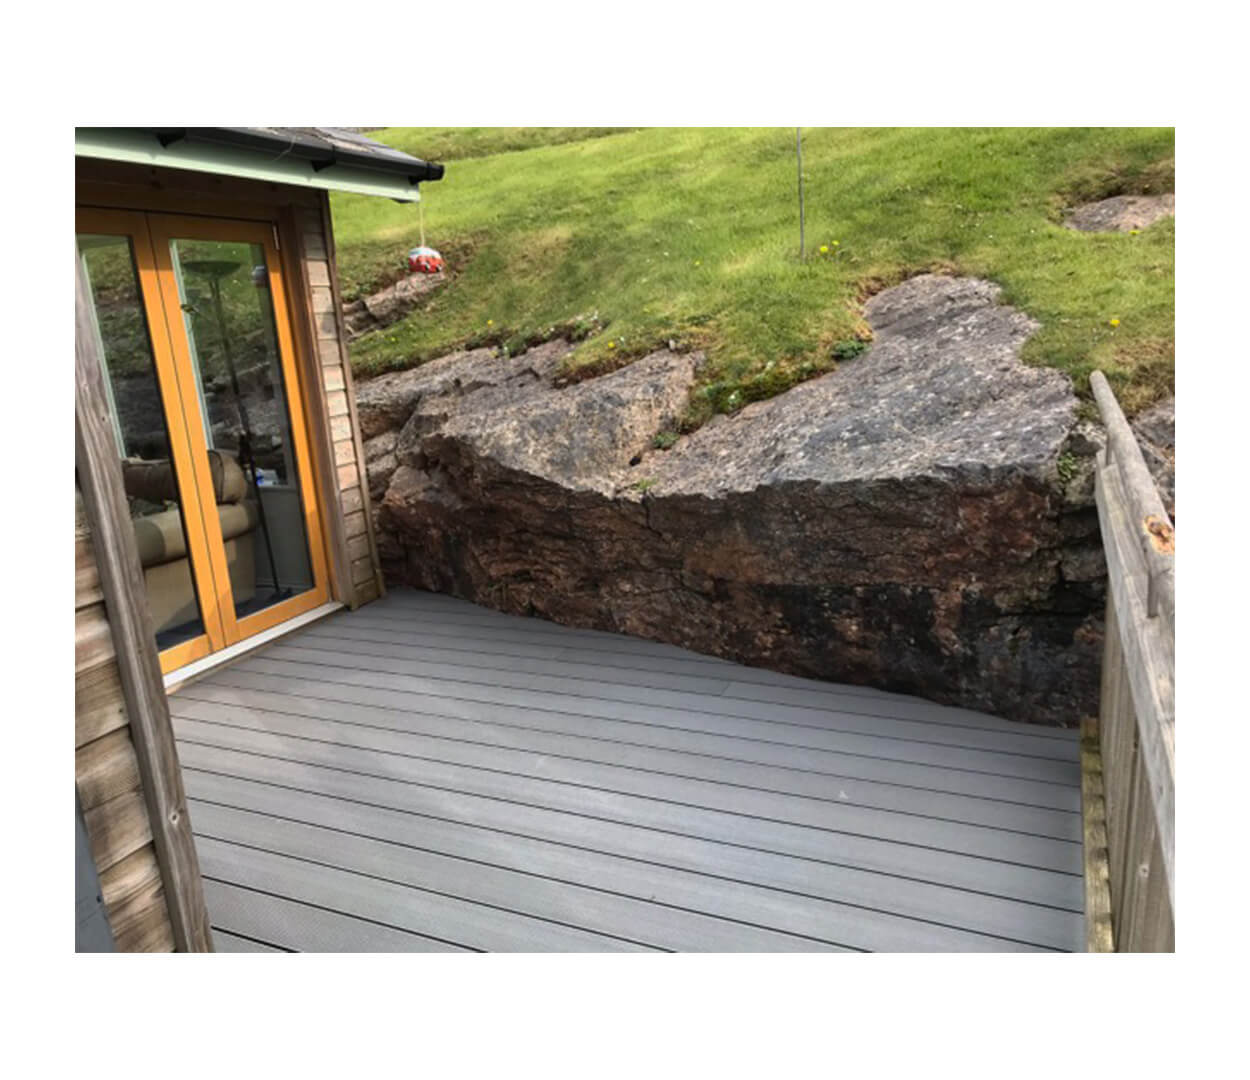 Stone Grey Decking against natural stone